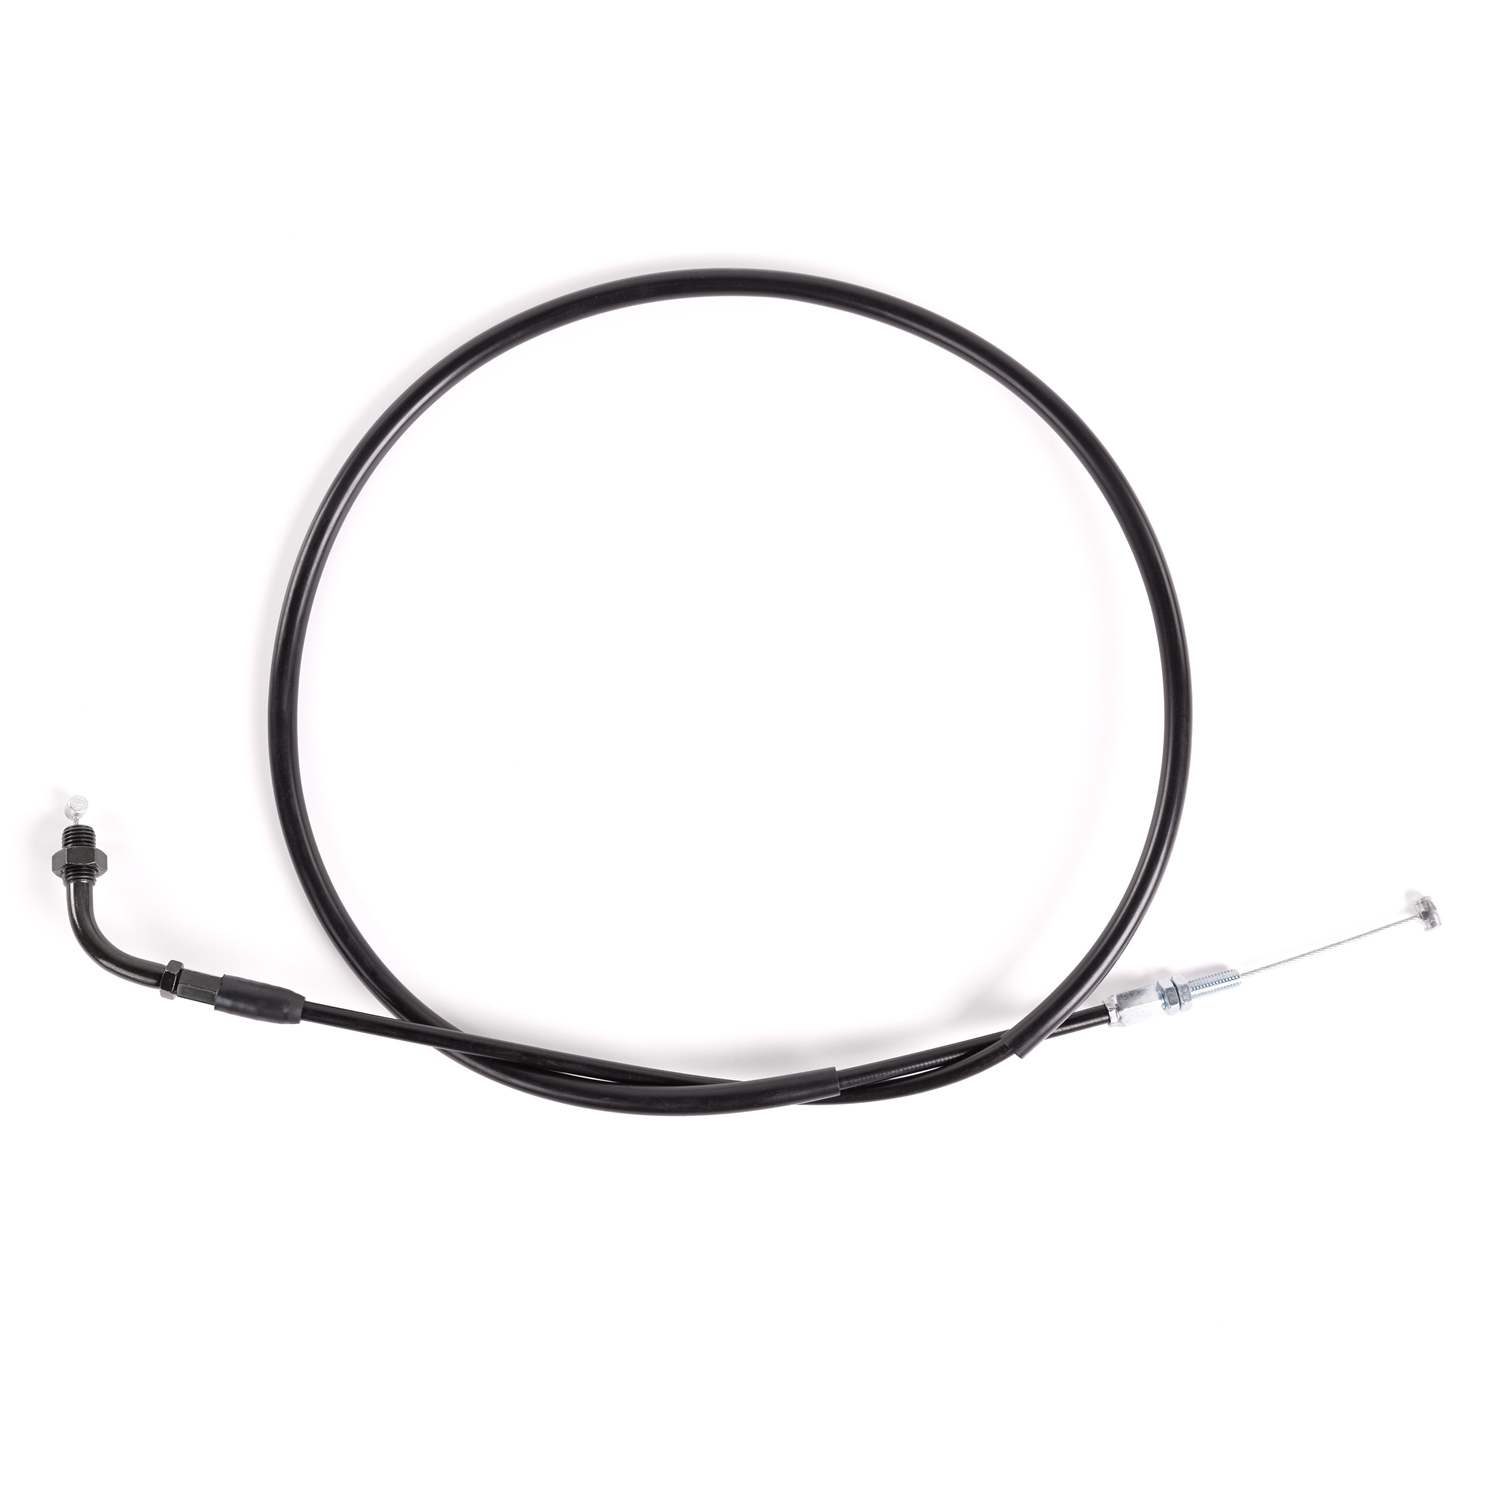 KIMPEX HONDA THROTTLE PULL CABLE